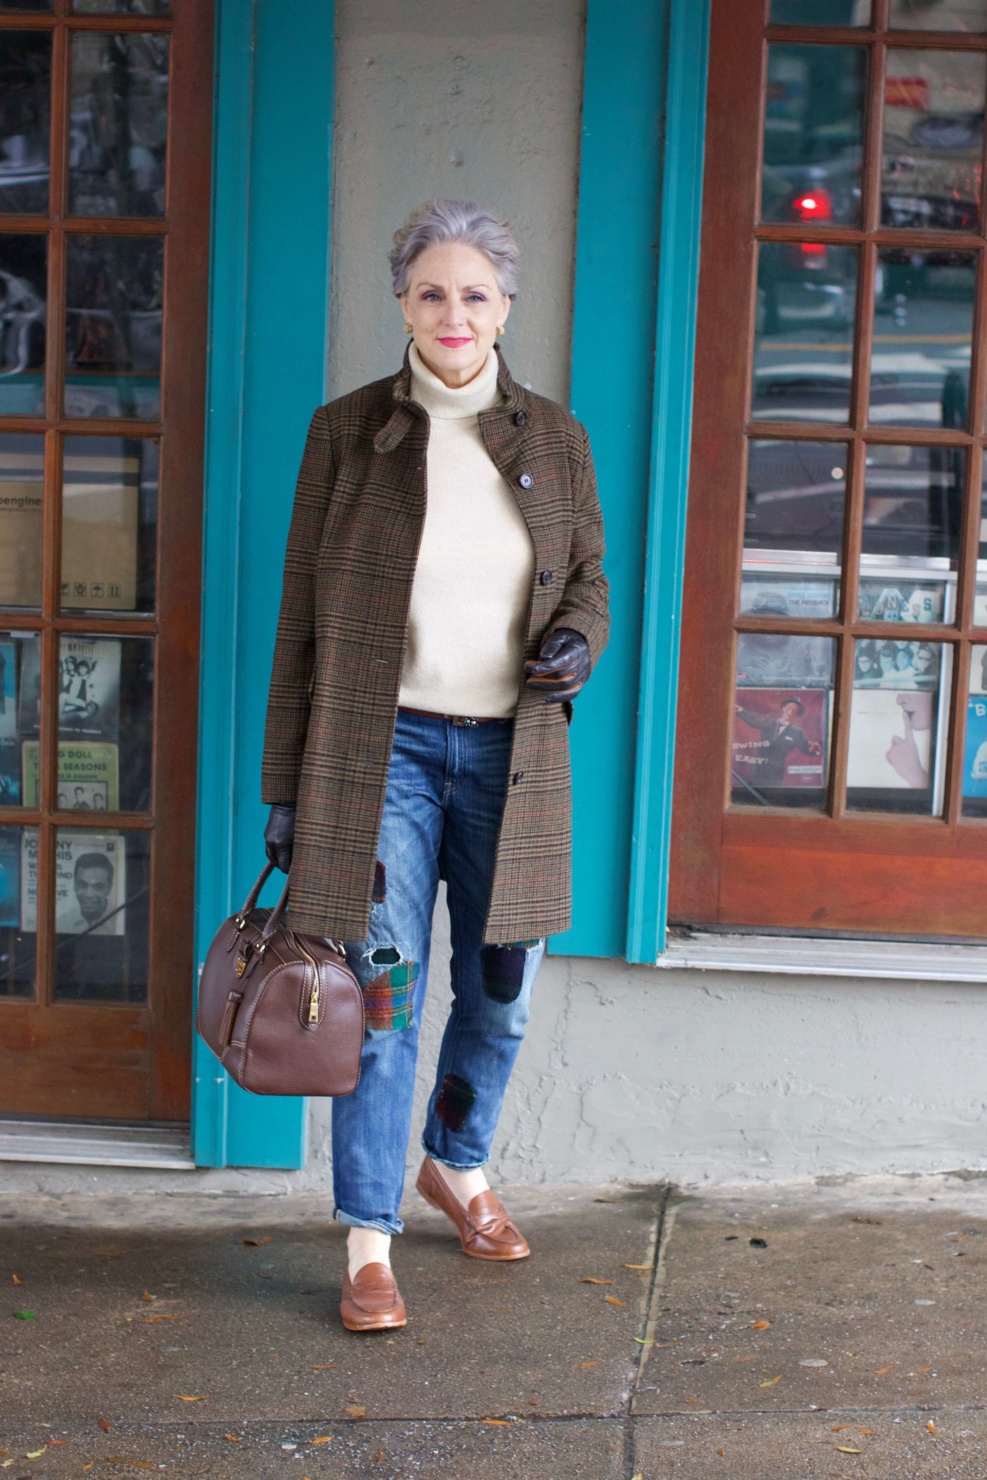 beth from Style at a Certain Age wears Ralph Lauren distressed jeans, Talbots cashmere turtleneck, J.Crew brown loafers, and Ralph Lauren glen plaid coat